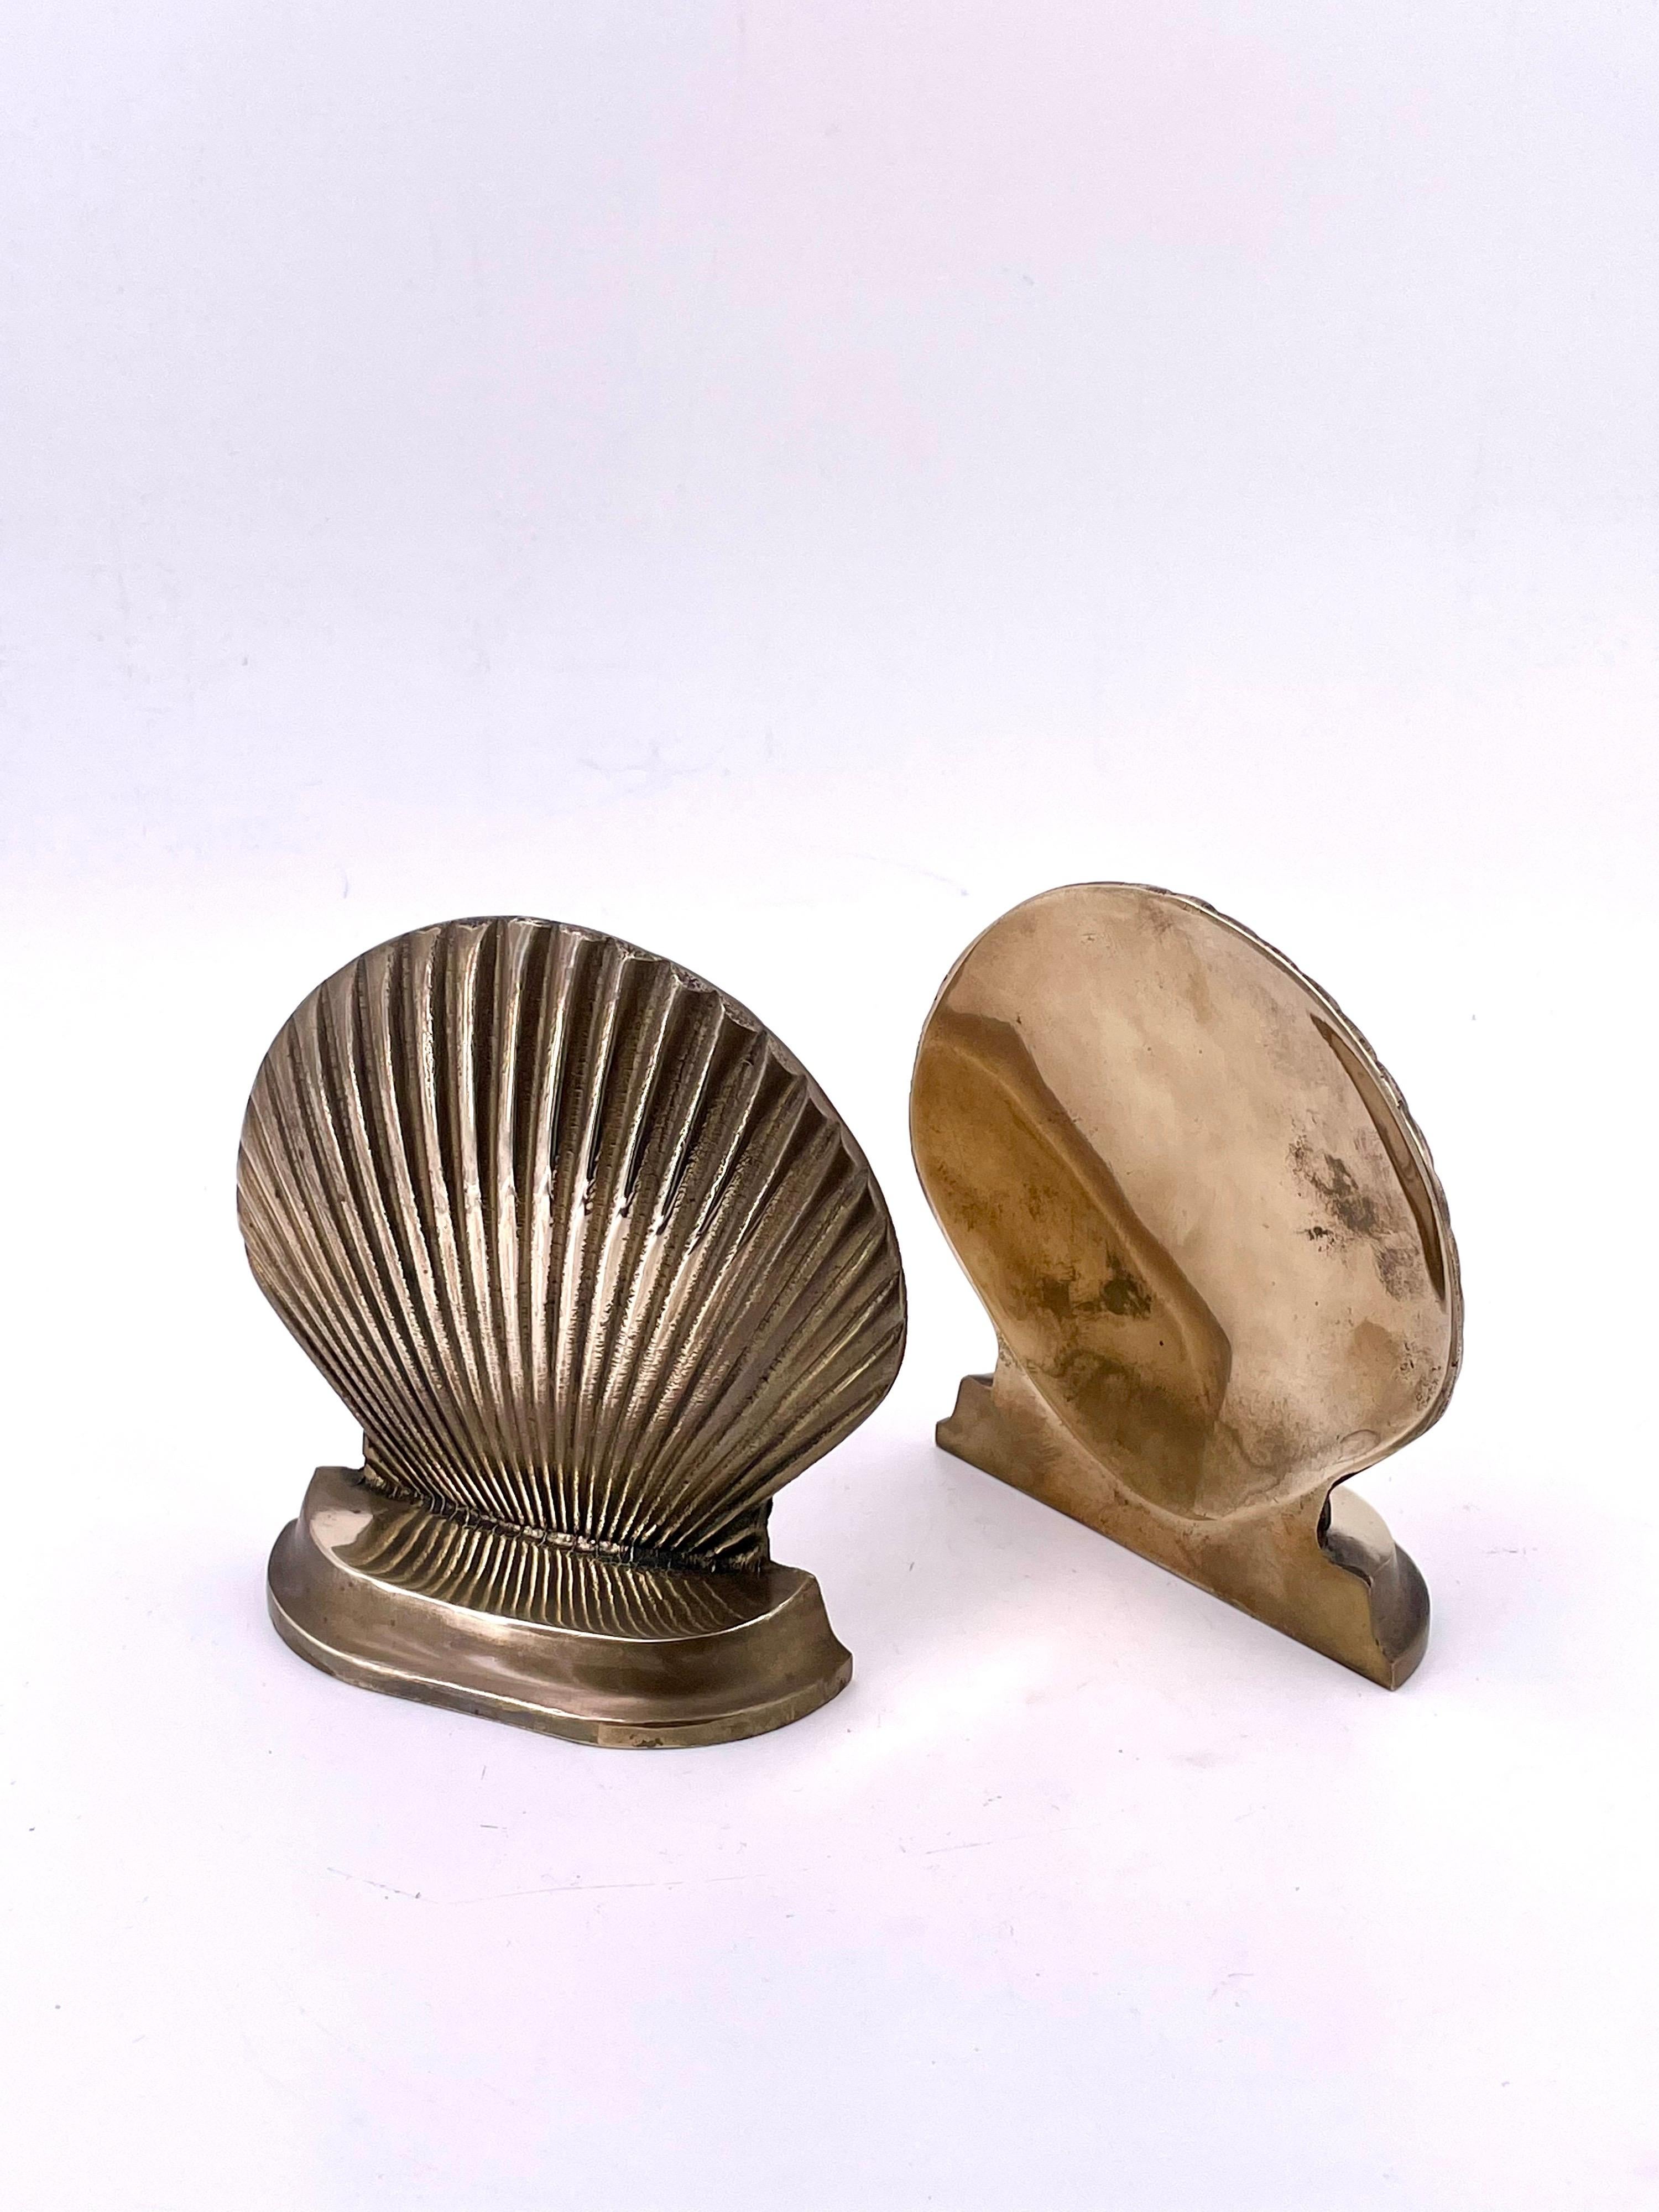 Incredibly glamourous polished brass seashell sculpture bookends. This pair stands alone as sculptural objects that amplify your style or become an evident piece of uniqueness in your eclectic library décor. The brass has been lightly polished and